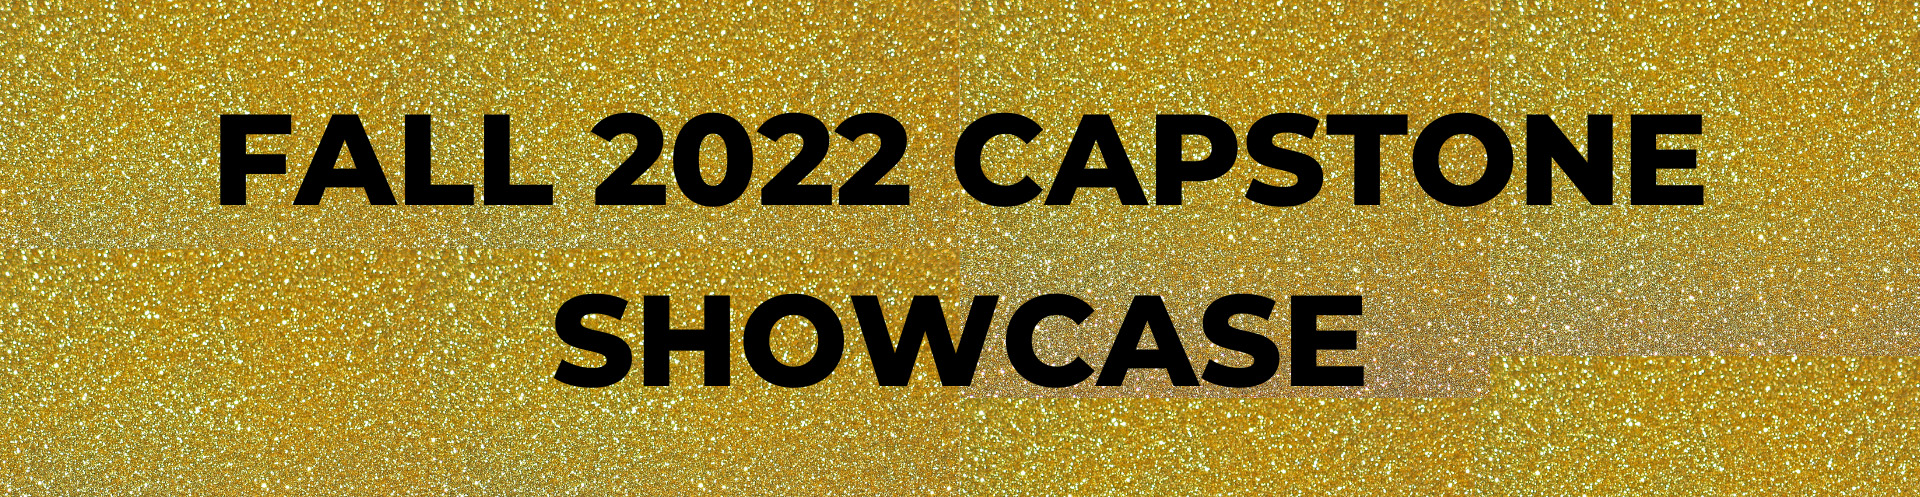 Capstone Showcase is December 3 at 2 PM